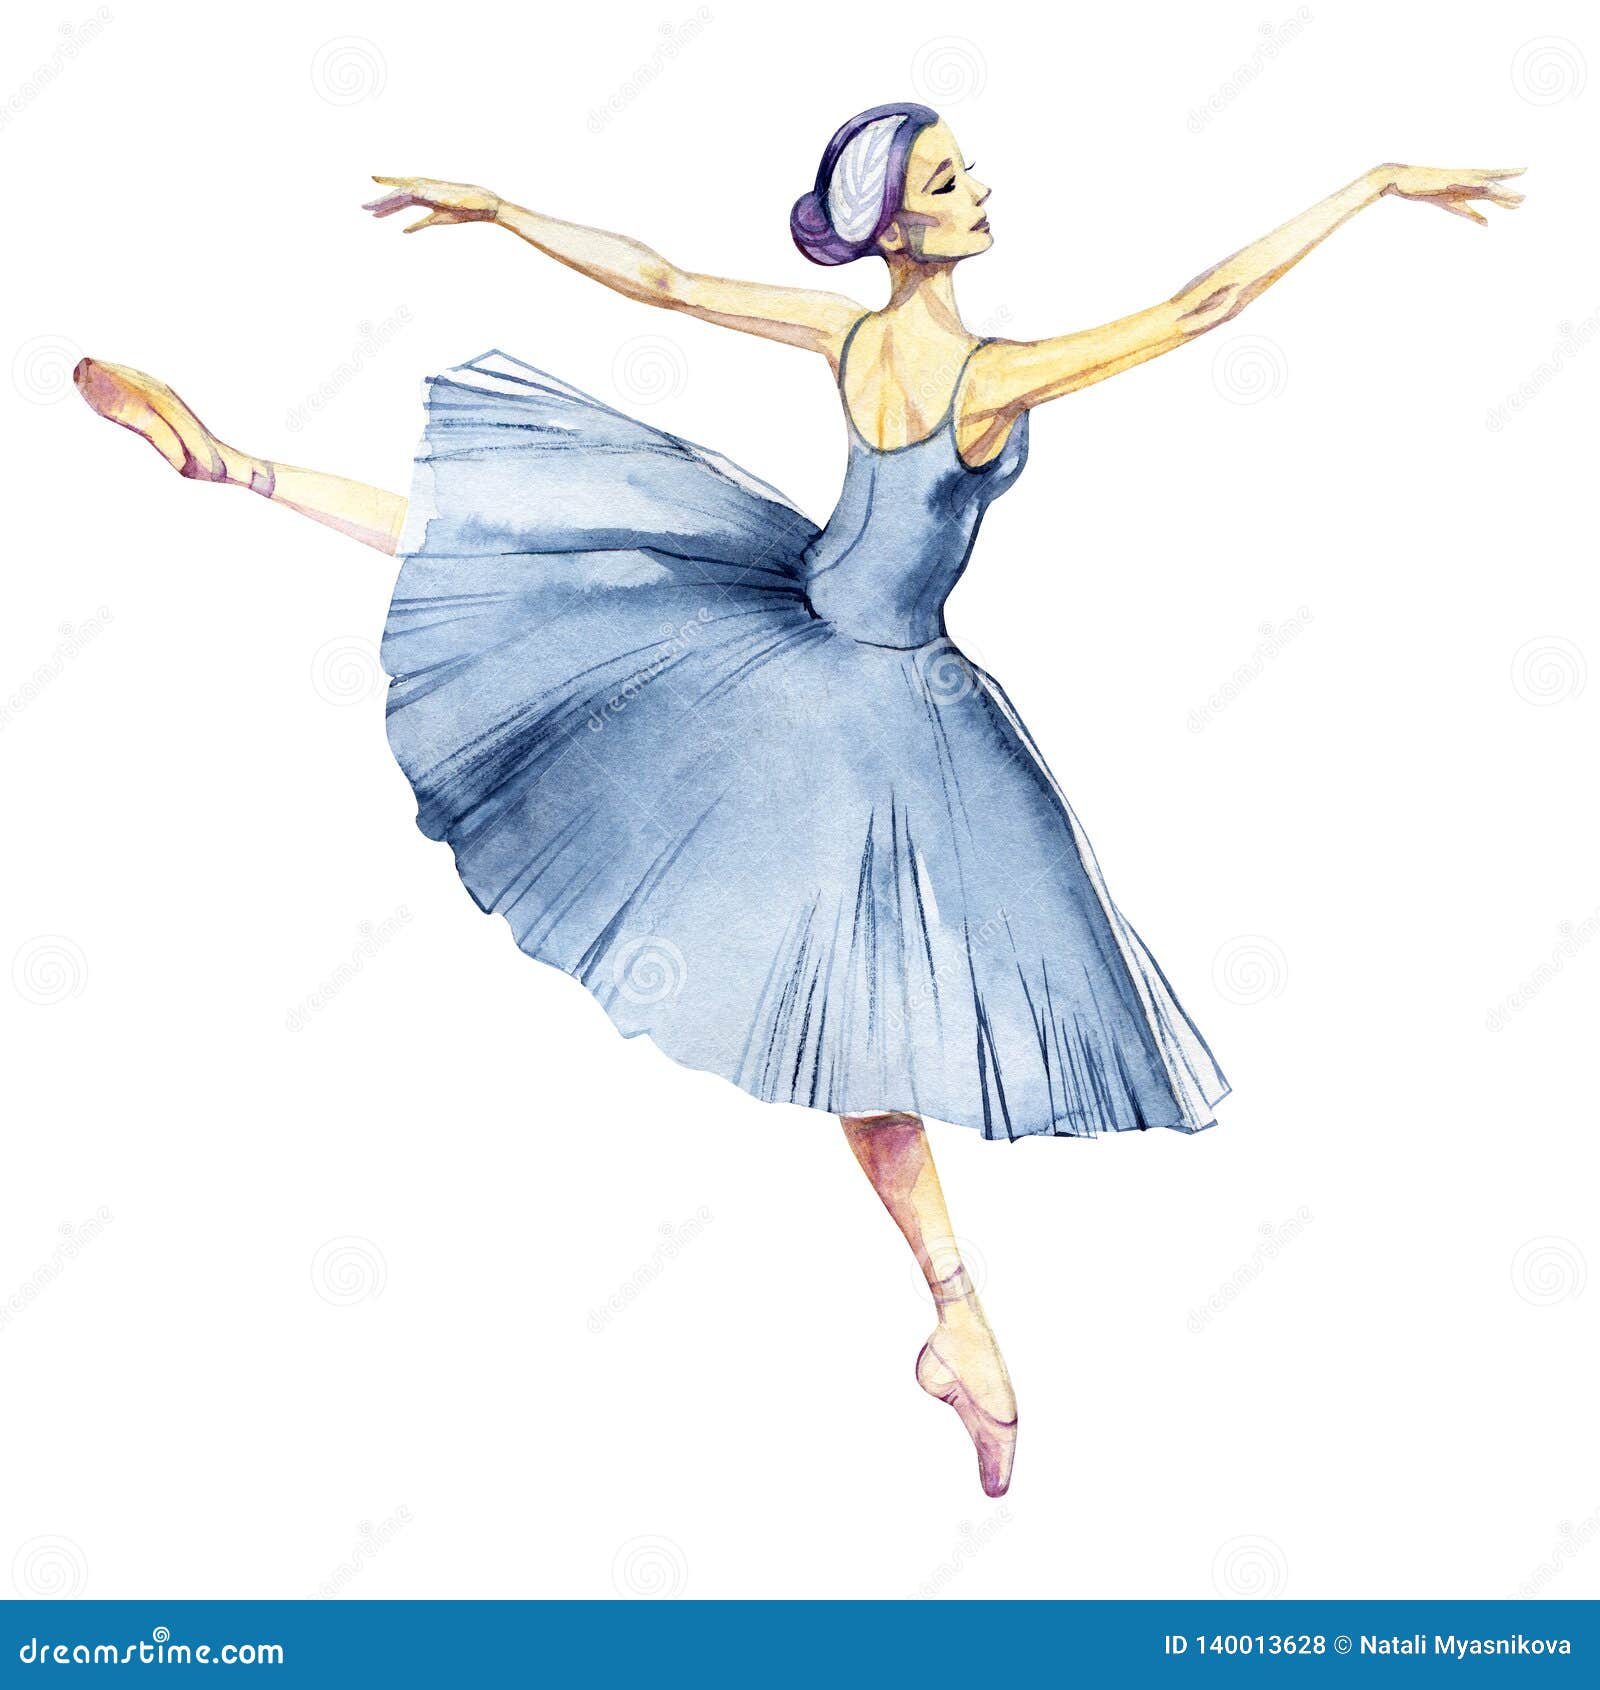 Dancing Watercolor Painting Isolated on White Background Greeting Card Stock Illustration - Illustration of female, dress: